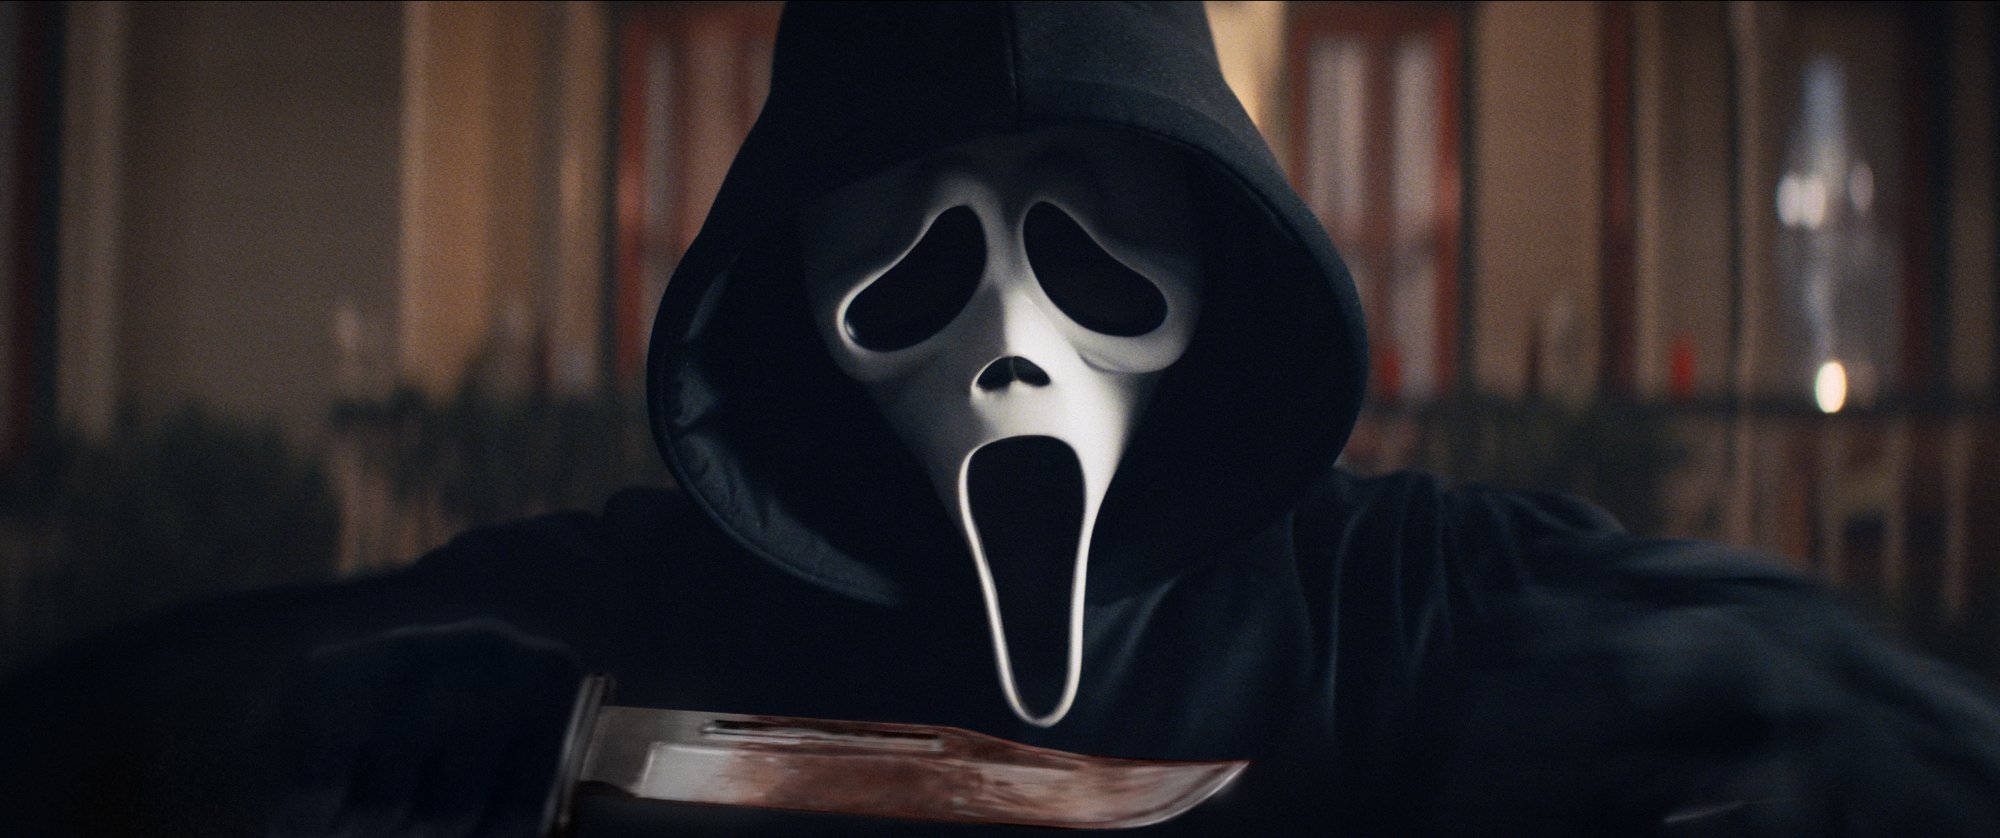 'Scream' review Ghostface holding a knife